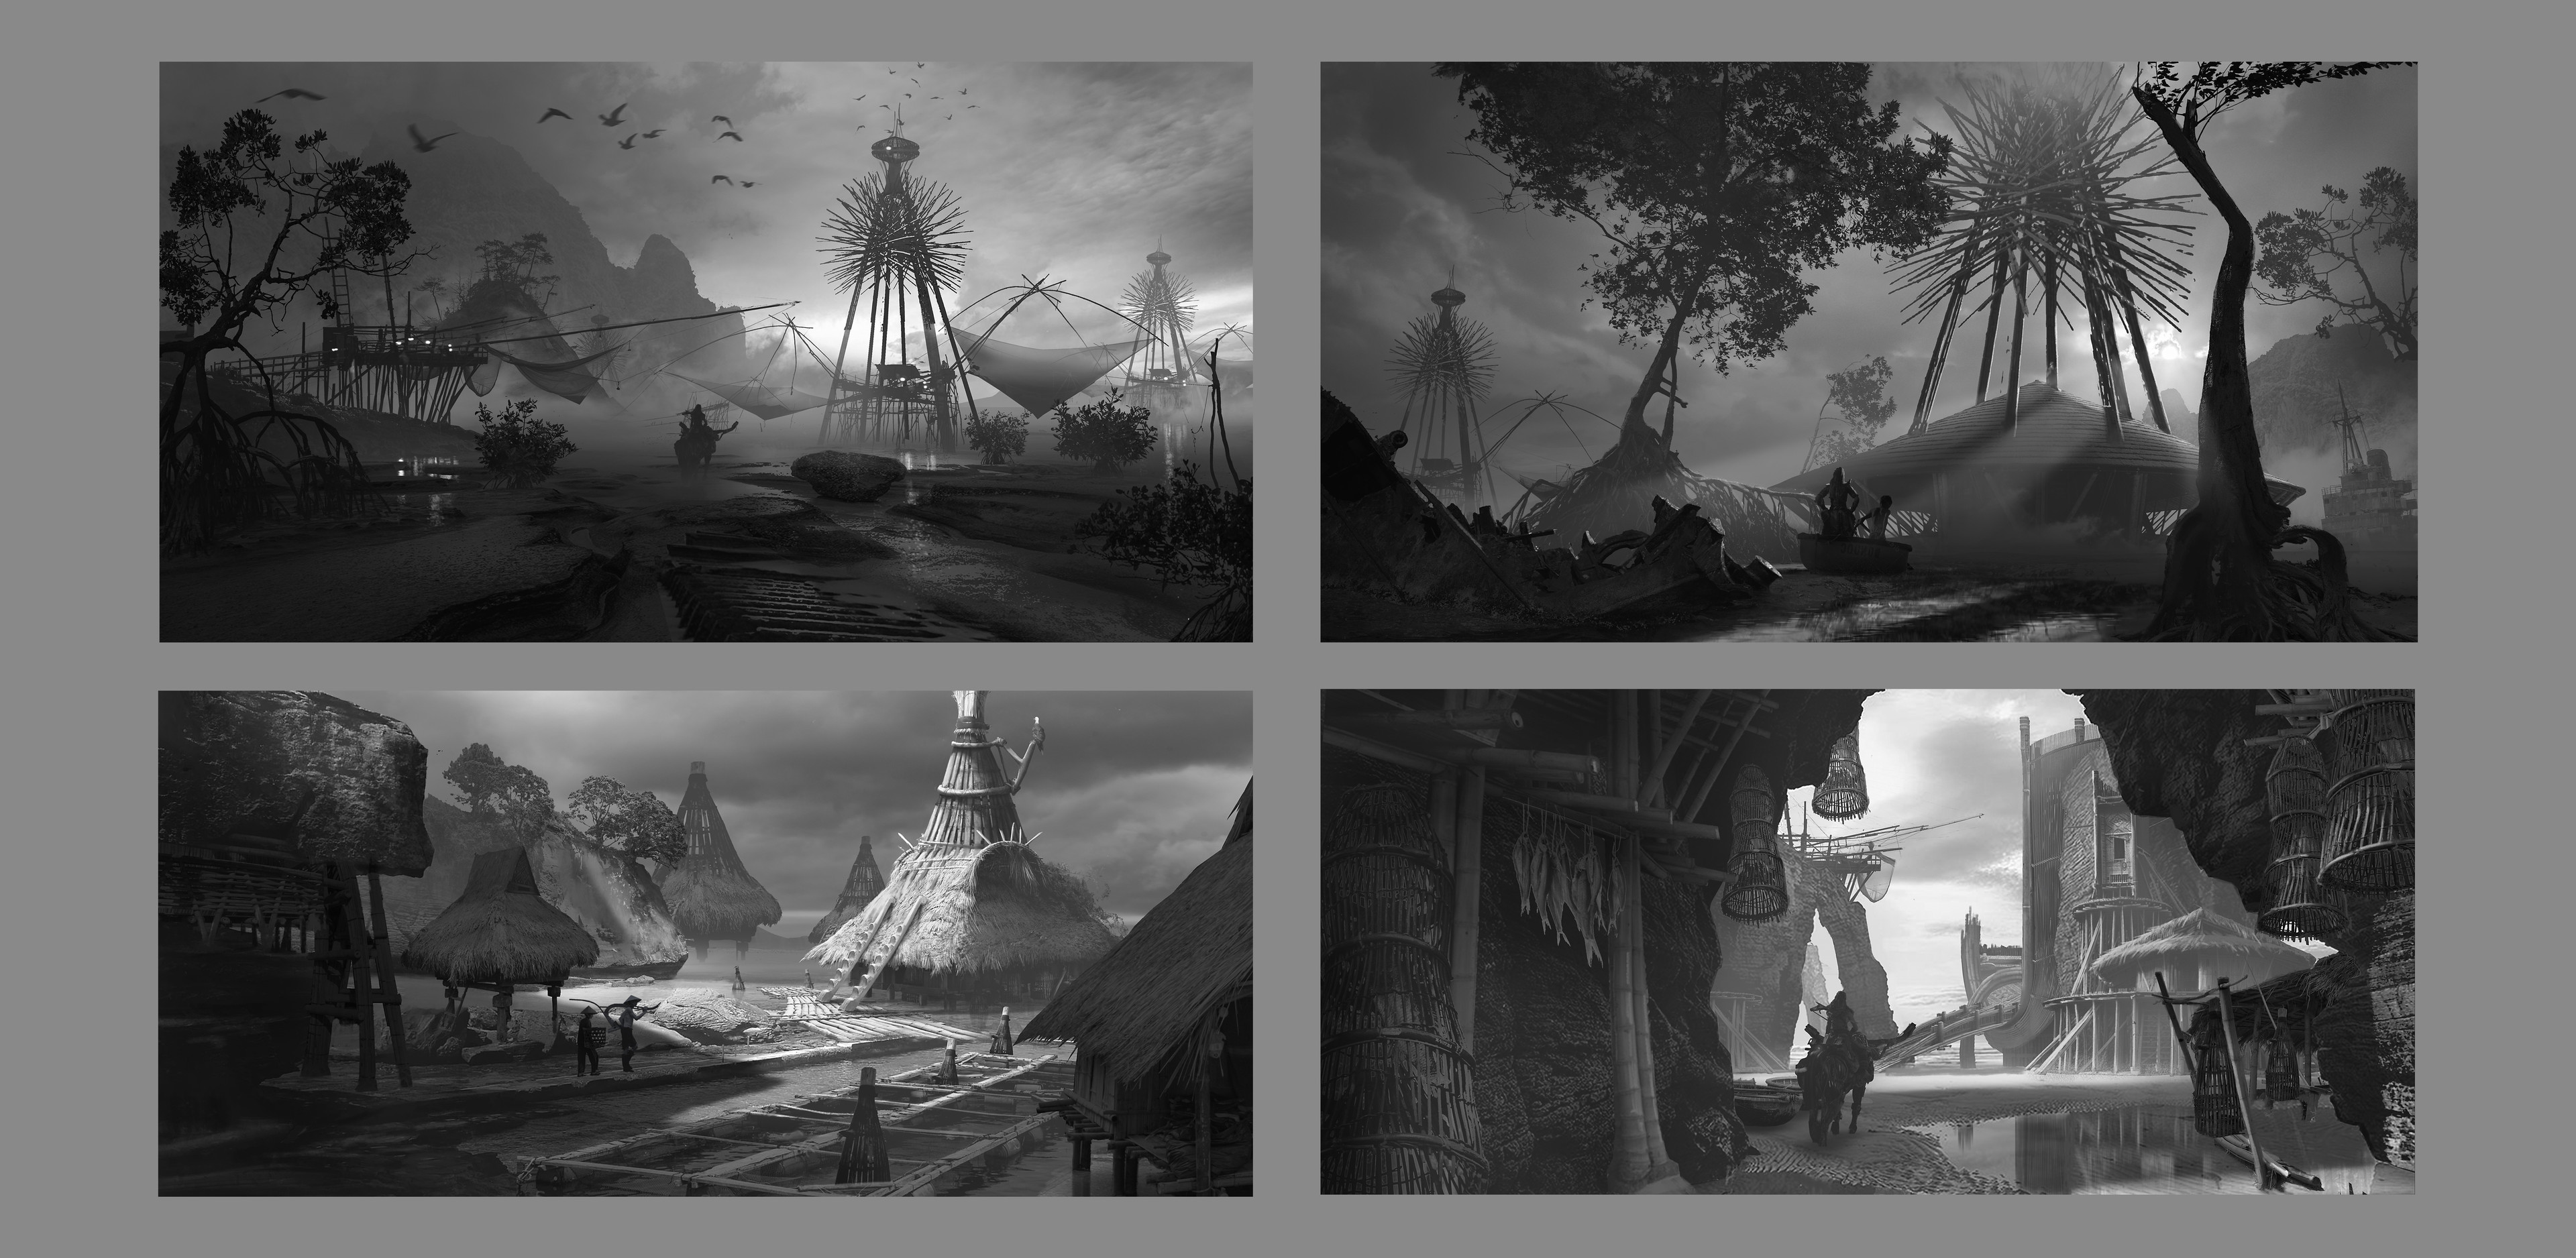 B/W Early Explorations